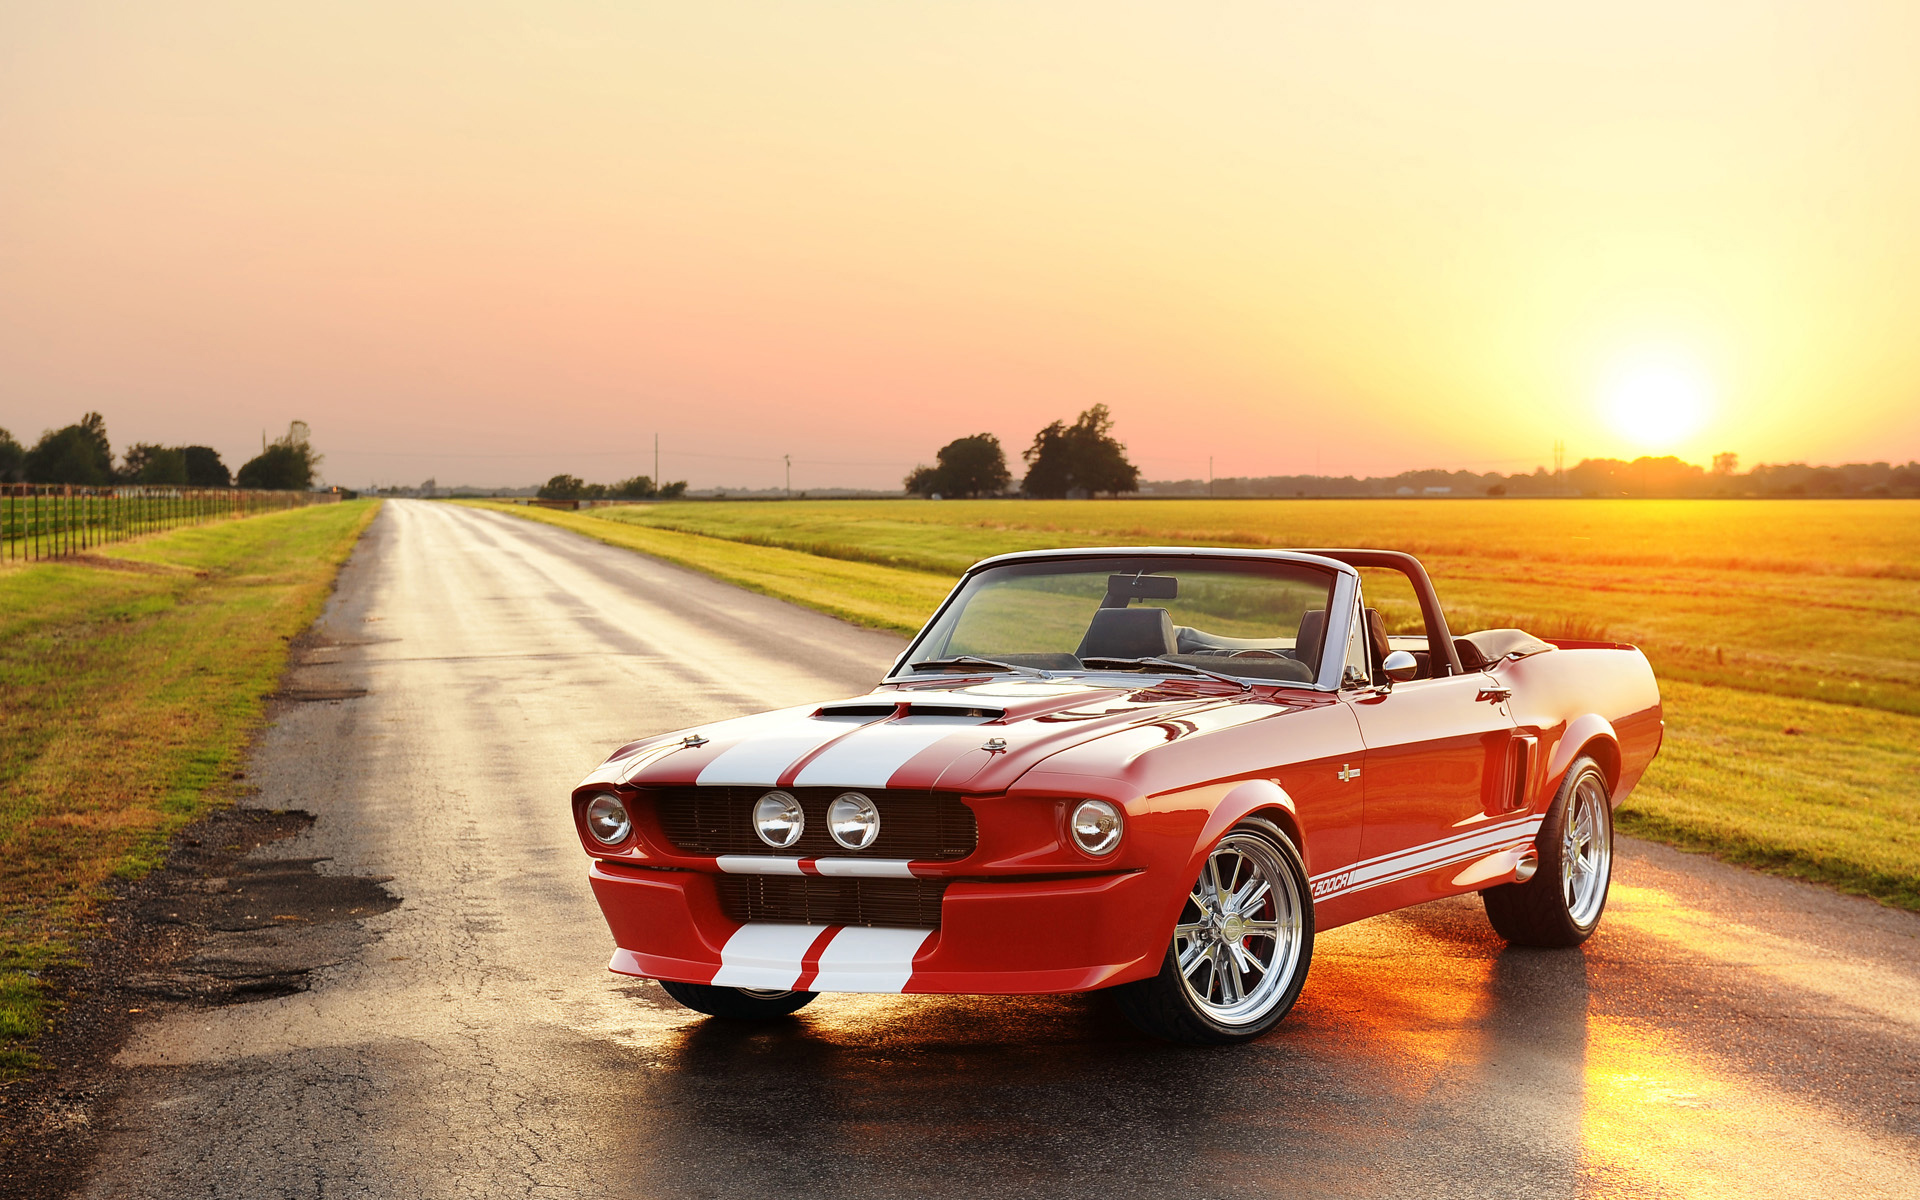 Ford Mustang Shelby Gt500 Red Sunset Wallpaper Car